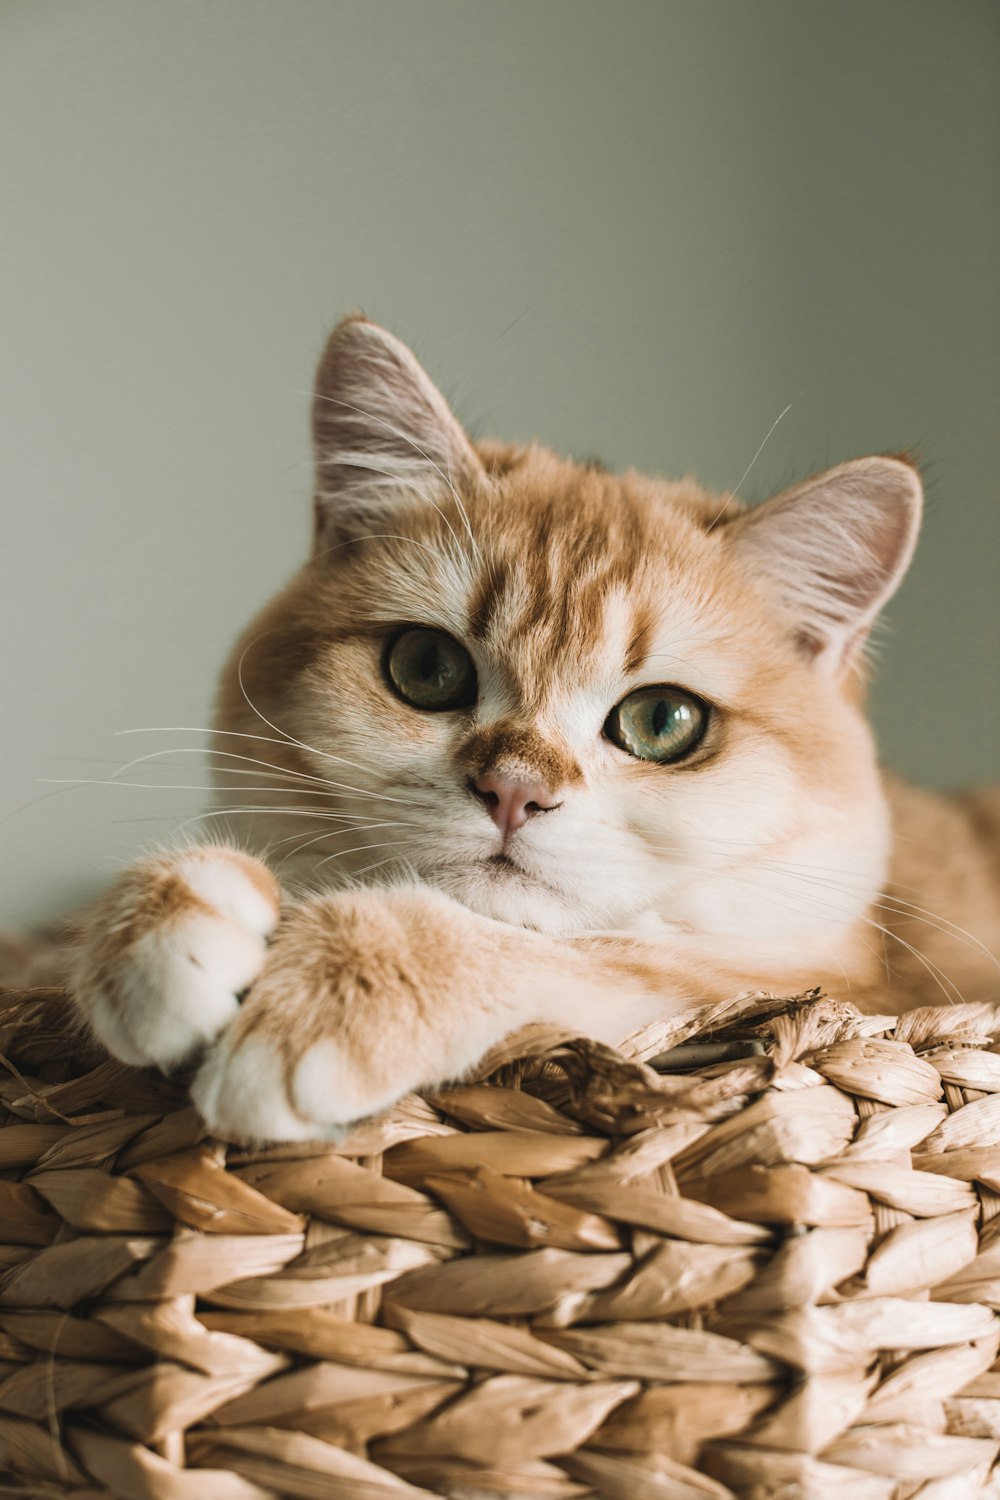 750+ Cute Cat Pictures | Download Free Images on Unsplash